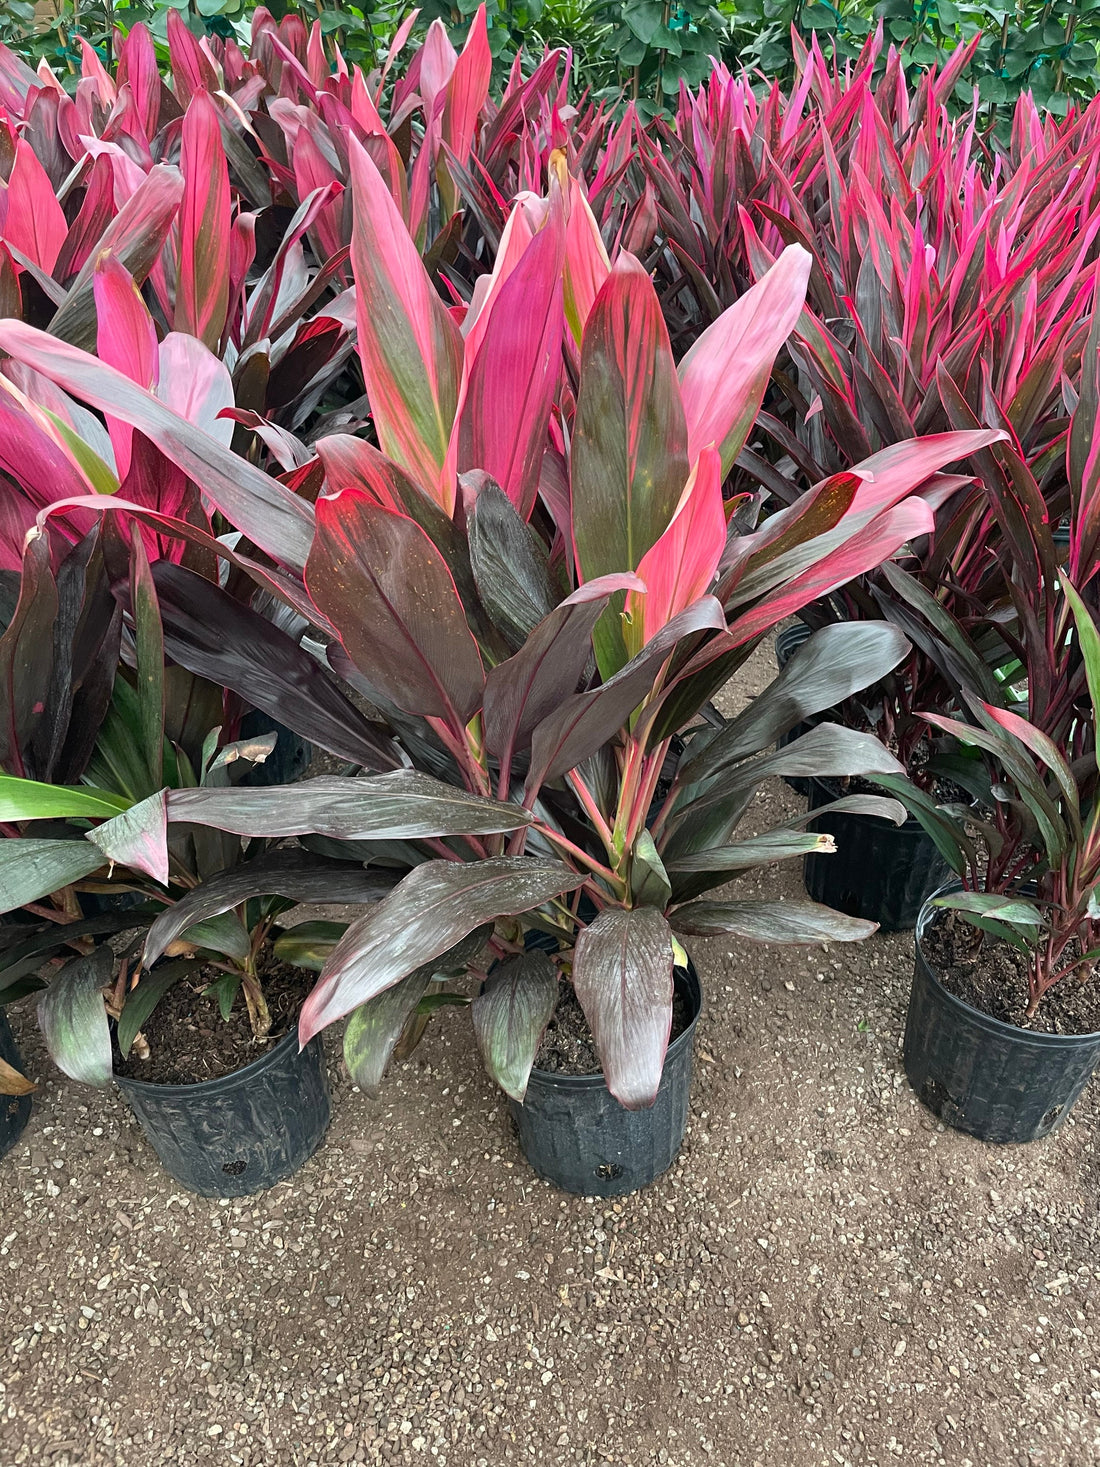 X Large 2-3-ft Cordyline -red sister-wide leaves -similar to picture not exact-5 gallon pot